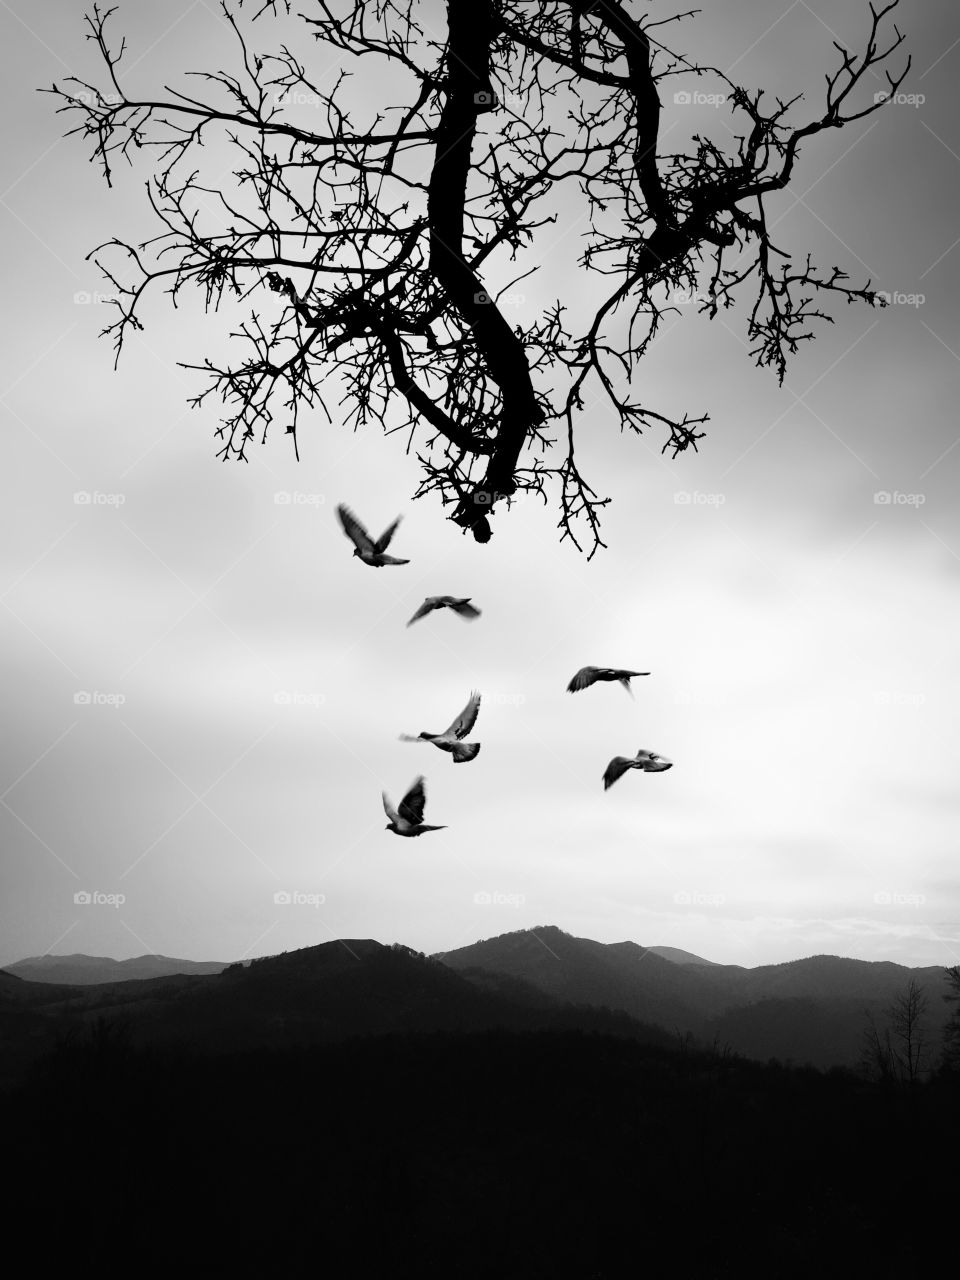 Black & white shot of mountains , branch tree and birds flying